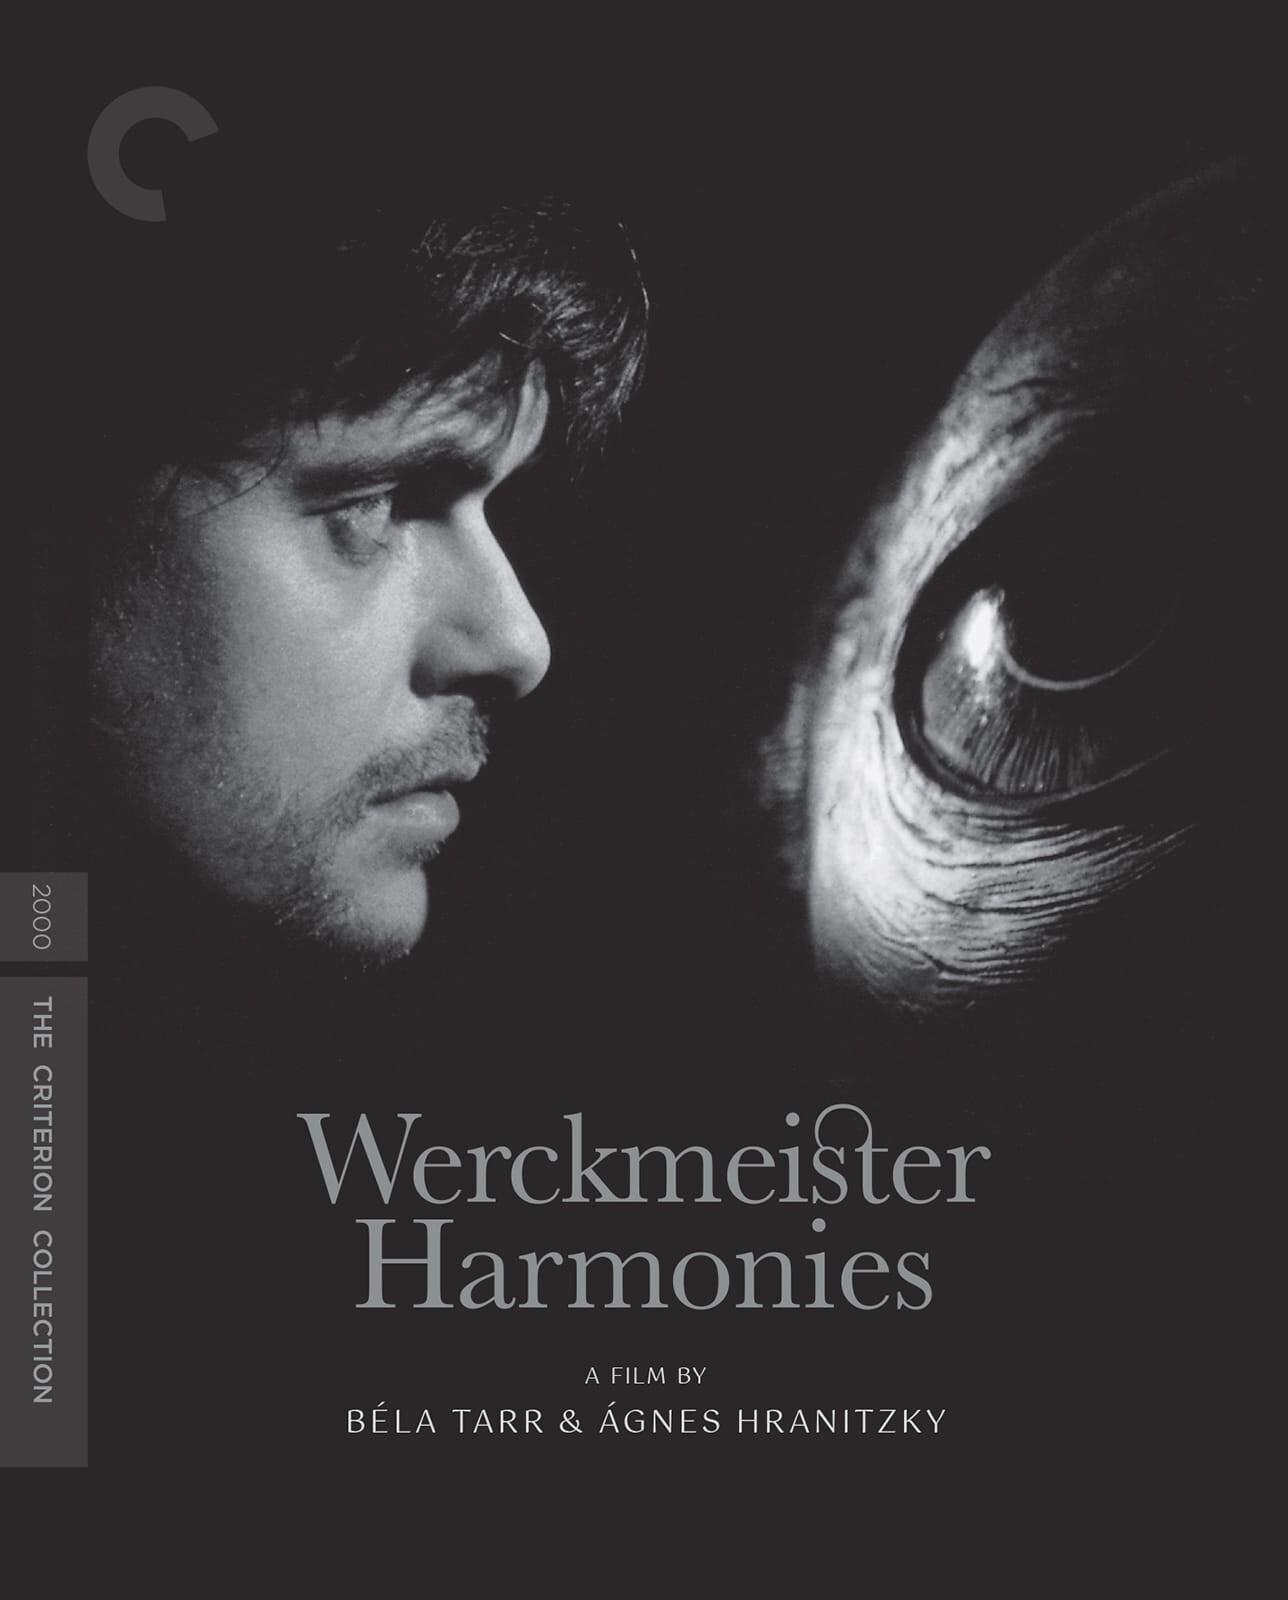 Werckmeister Harmonies (Criterion Collection)/Lars Rudolph, Peter Fitz, and Hanna Schygulla@Not Rated@4K Ultra HD/Blu-ray